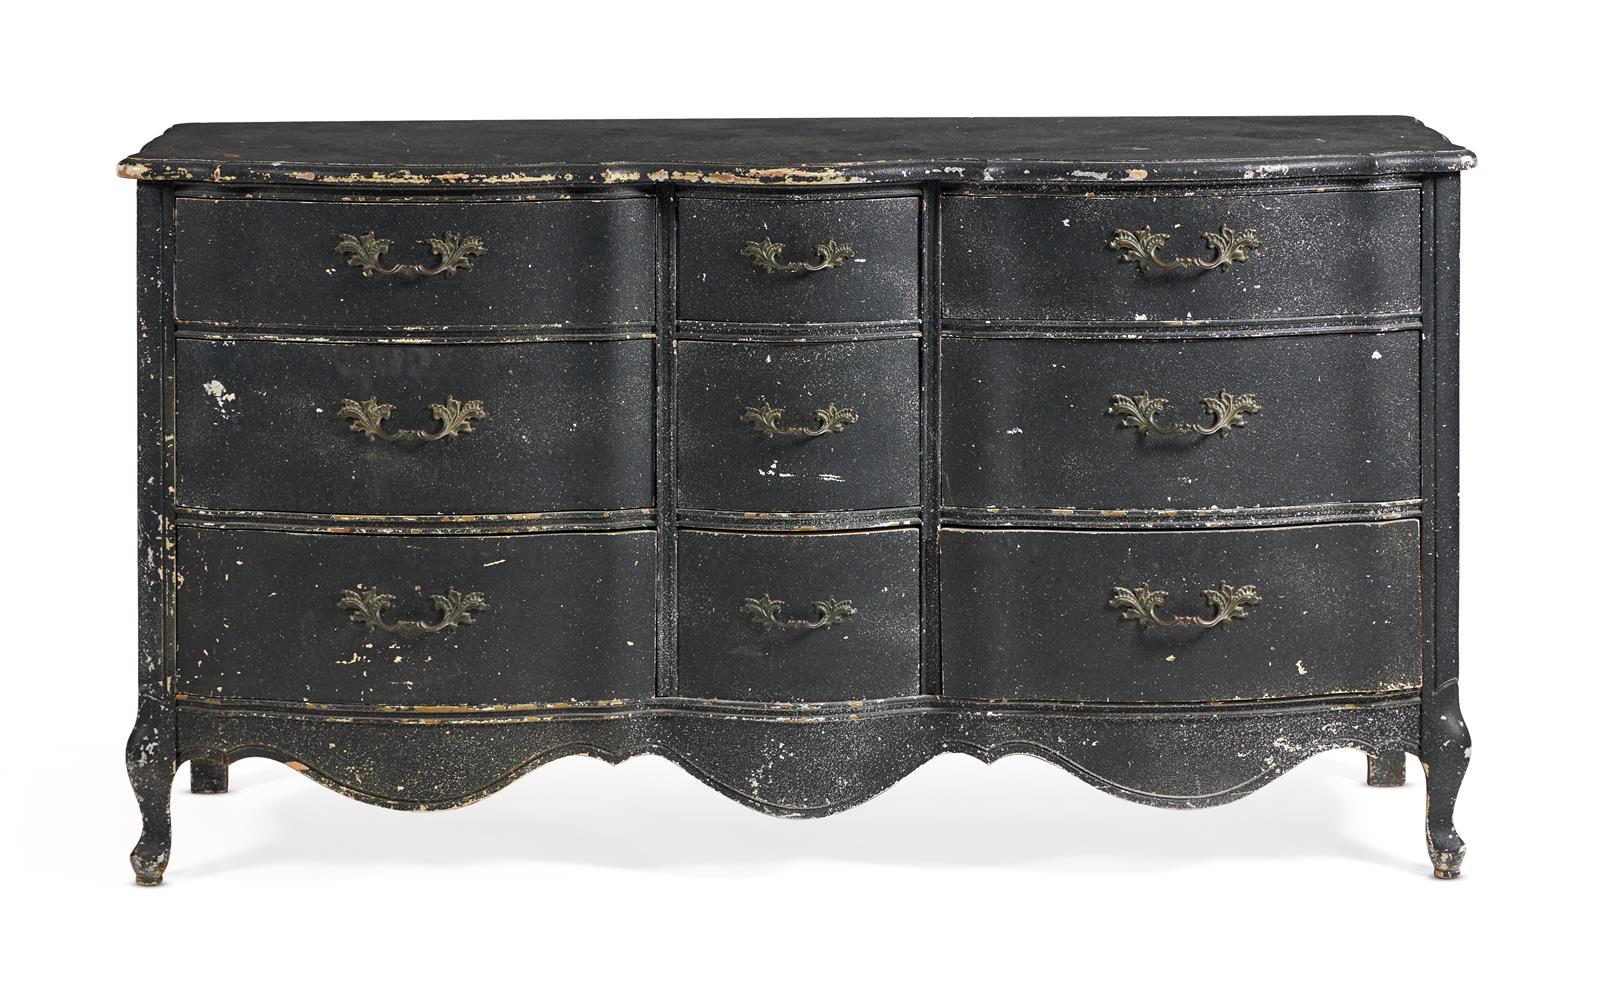 AN AMERICAN COMMODE IN LOUIS XV STYLE, LATE 20TH CENTURY